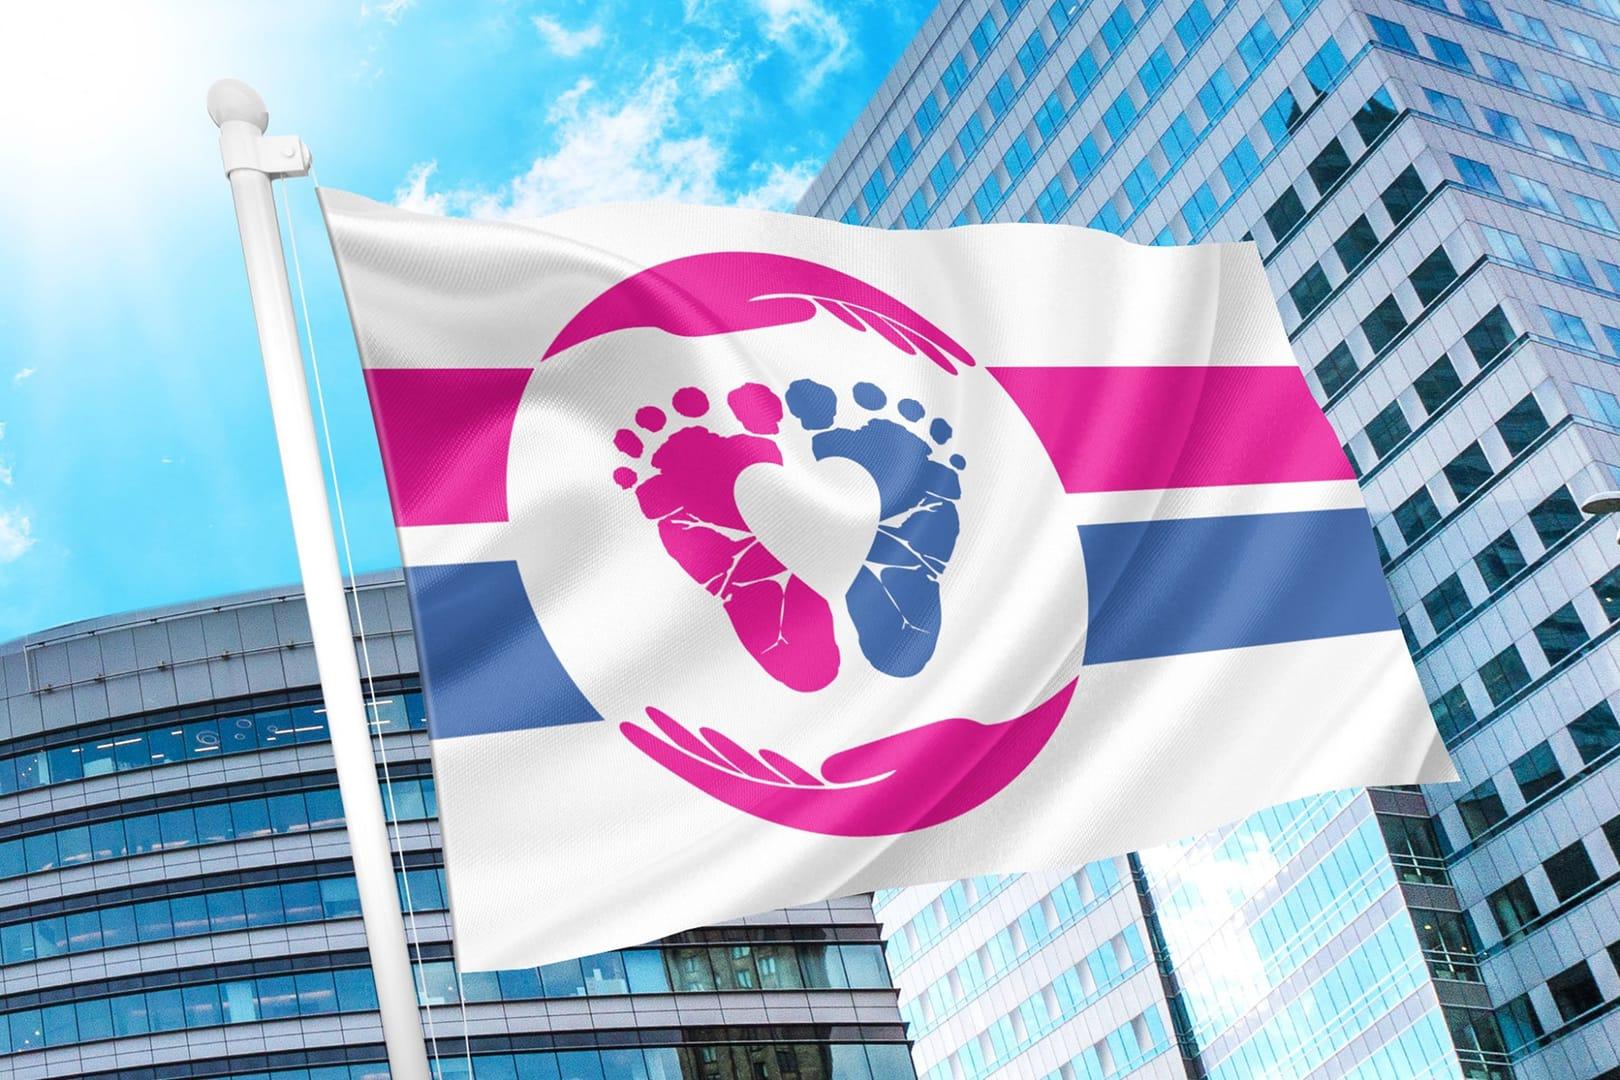 Pro-life advocates hope new flag becomes unifying symbol of movement